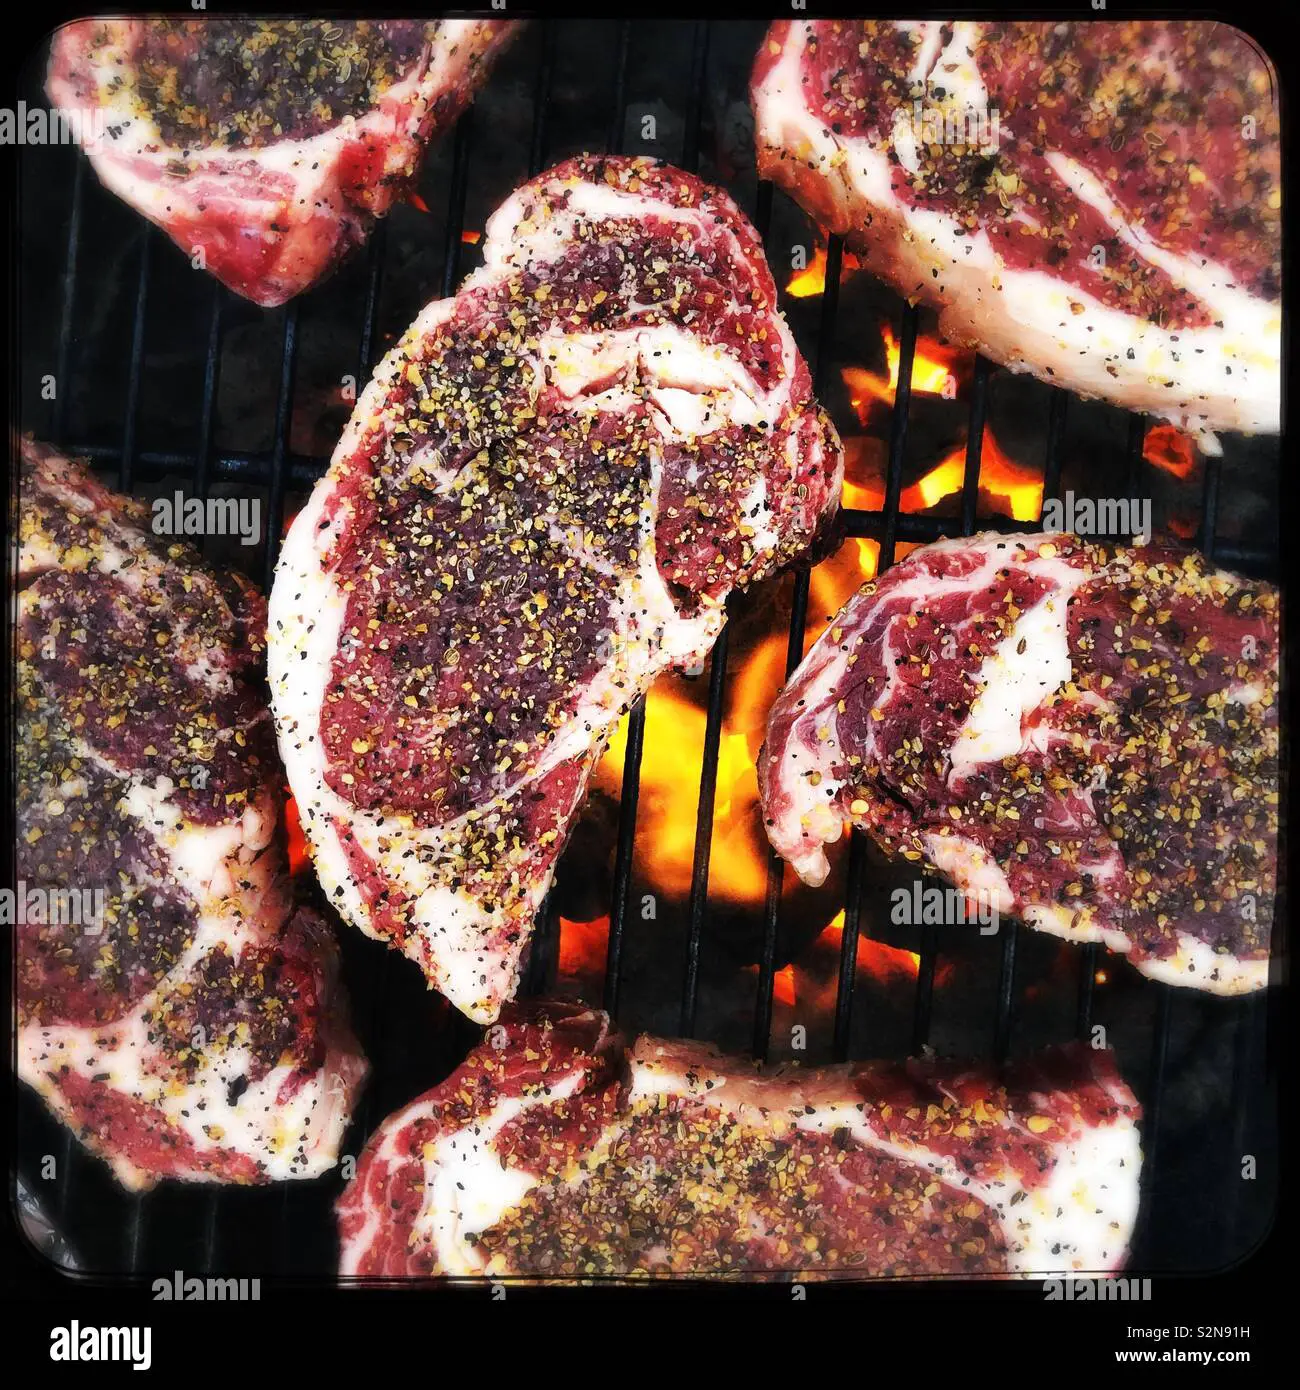 Ribeye Steaks on the Charcoal Grill Stock Photo